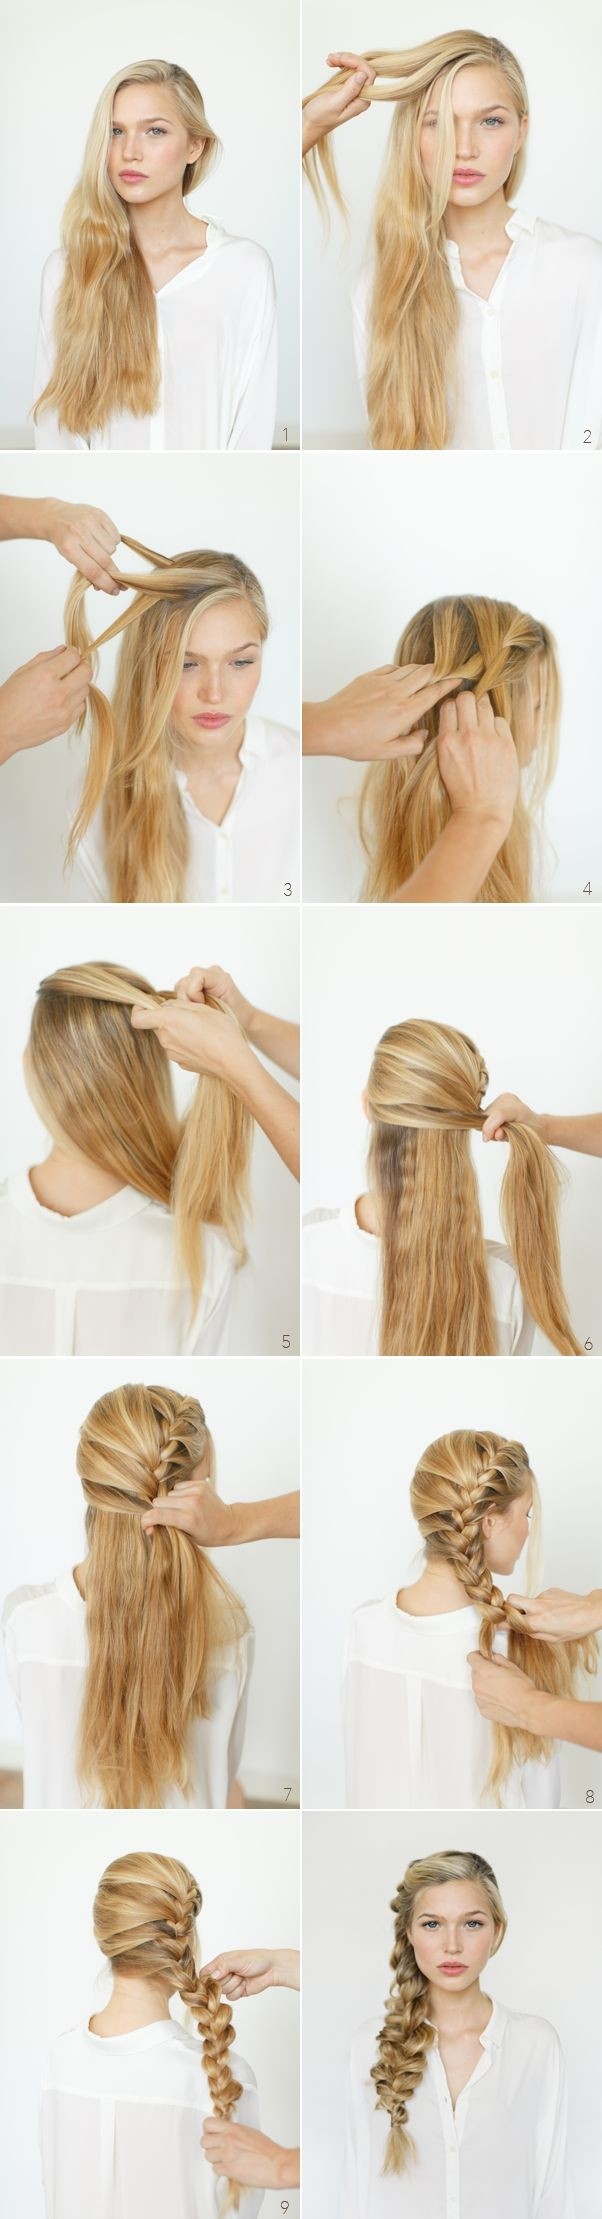 Messy Side Braided Ponytail Hairstyle Tutorial